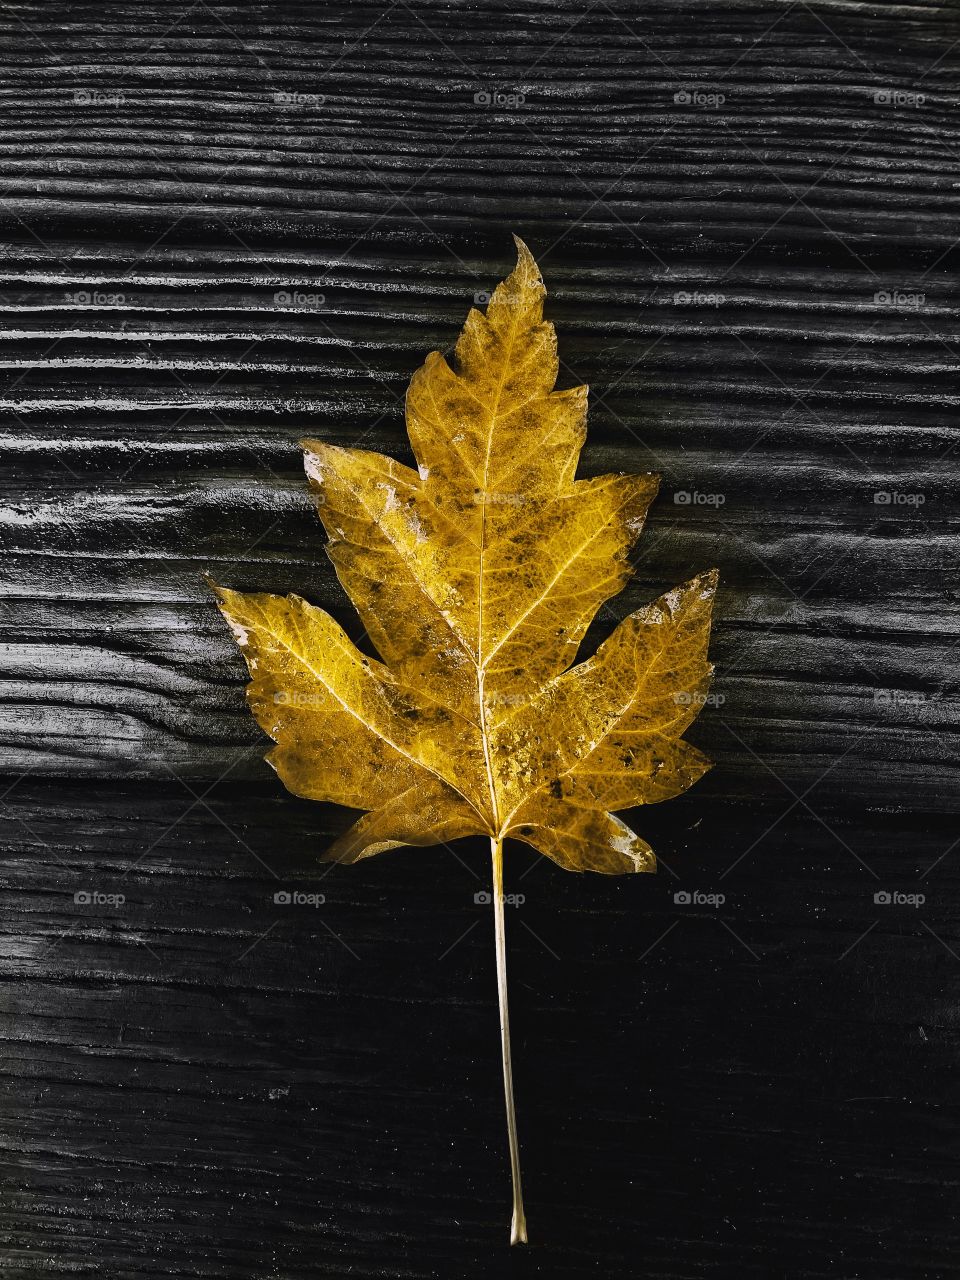 Yellow yellowish tones leave leaf leaves autumn wood grain pattern background lumber fallen fall rustic outdoors nature vibes colors color pop timber planks season winter cooler weather Country rural Gray and yellow Black white color colorful moody